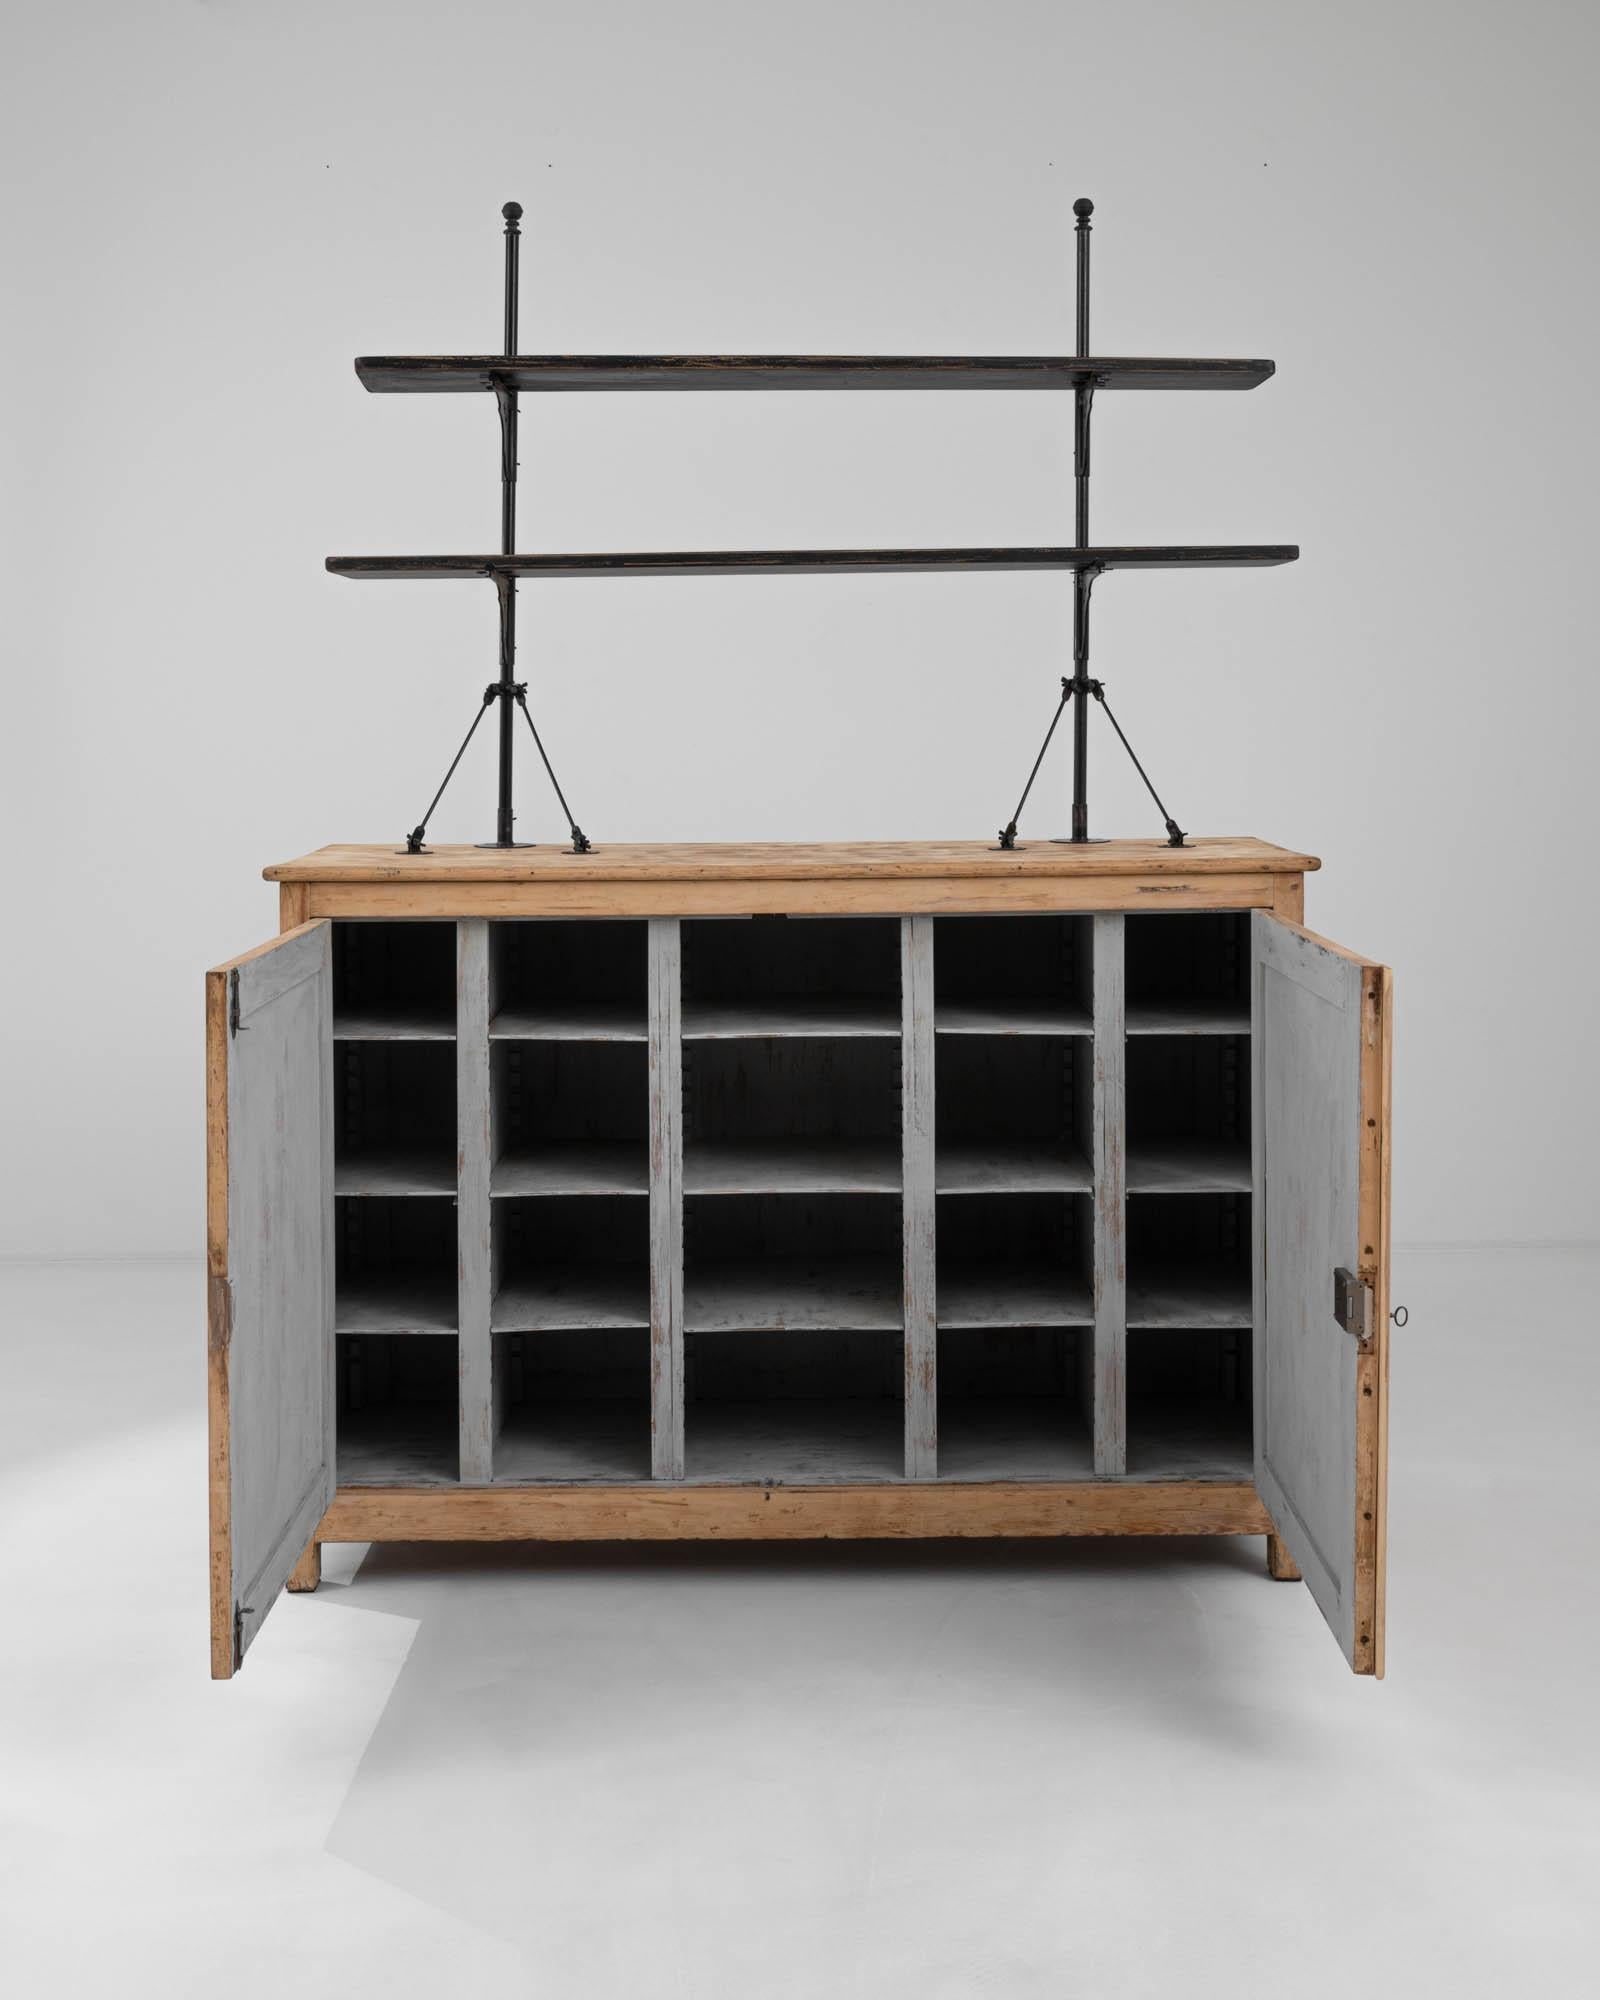 A wooden display cabinet from France, produced circa 1900. This humble country cabinet is an unexpected totem of the 20th Century: iron and wood, joined together by industry, rising towards the heavens as part of man’s march of progress: two tiers